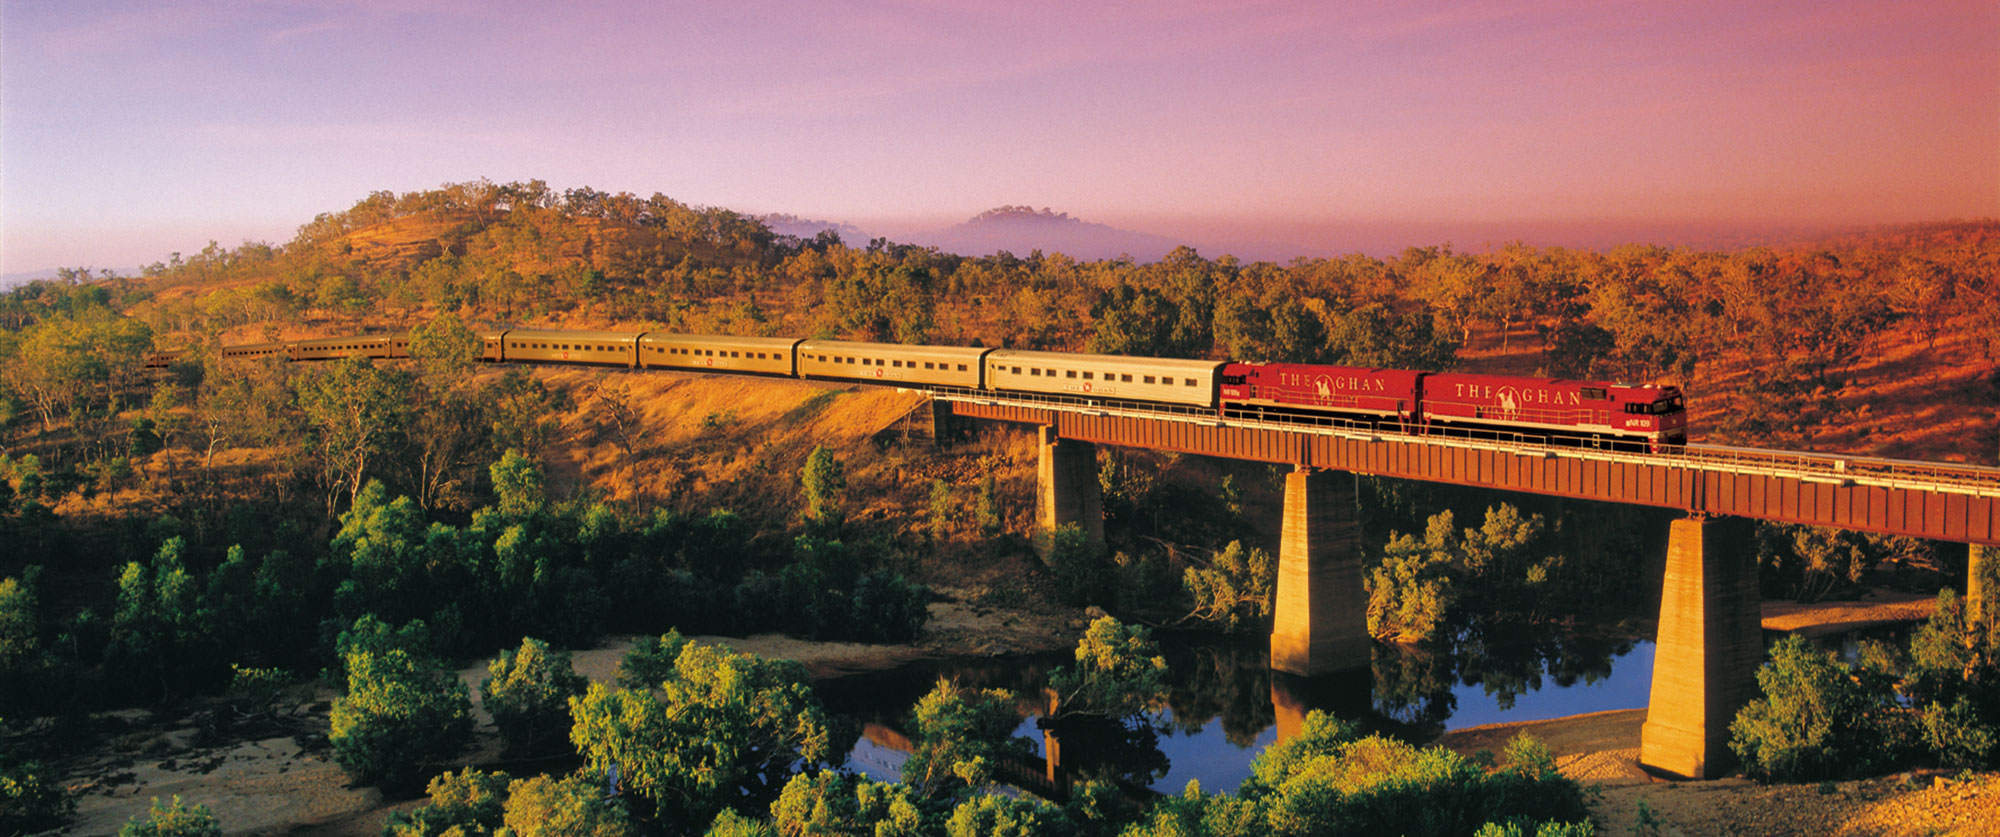 Australian Outback Vacation - The Ghan